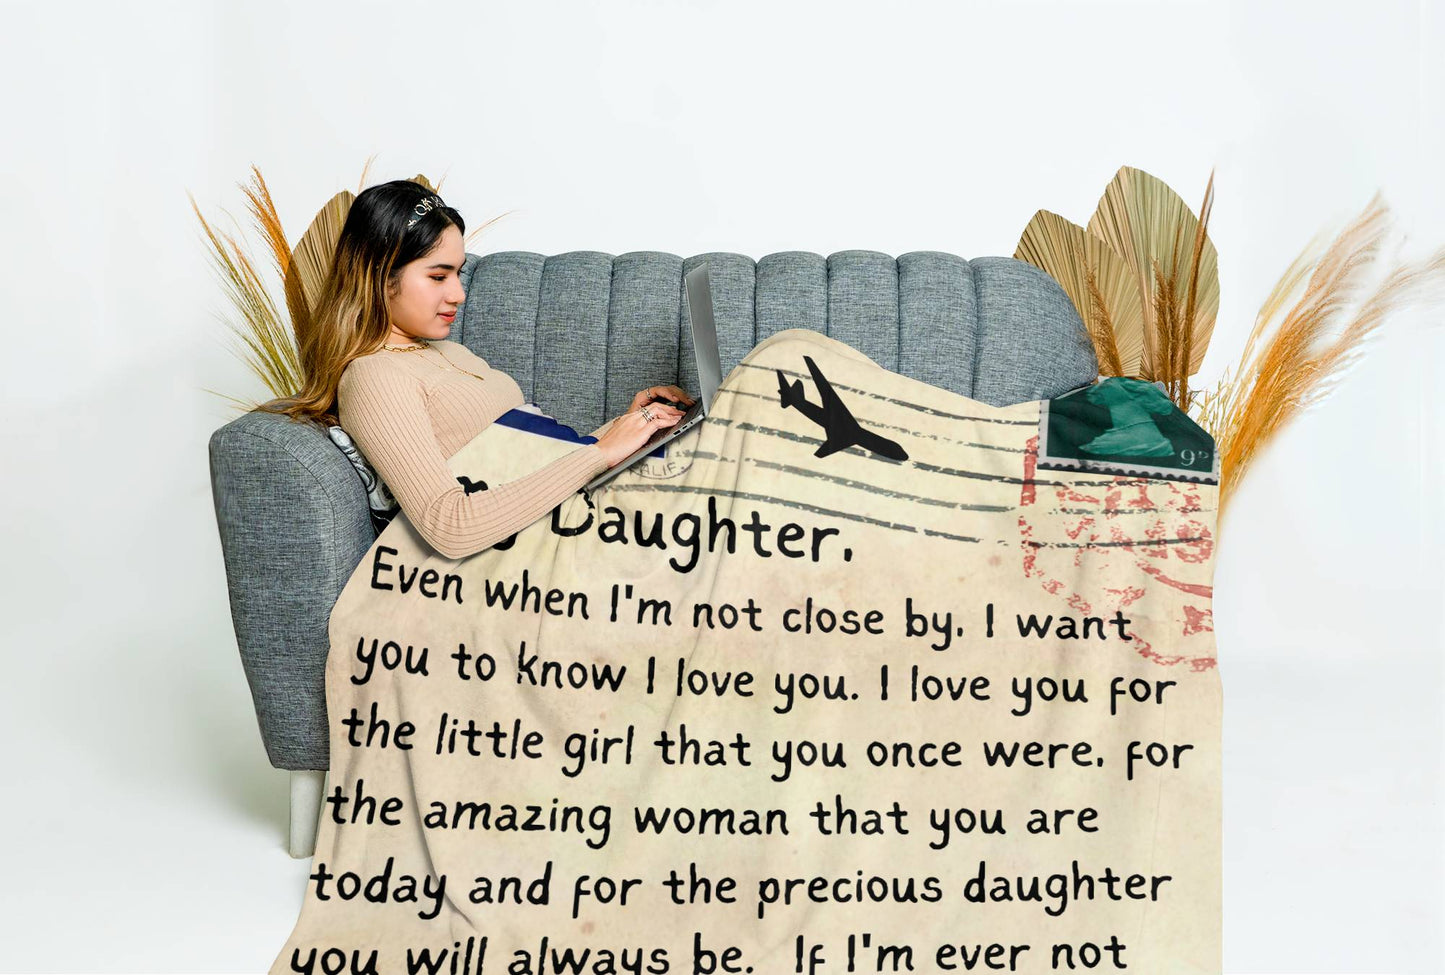 To My Daughter | Postcard Letter Throw Blanket 50x60 | From Dad